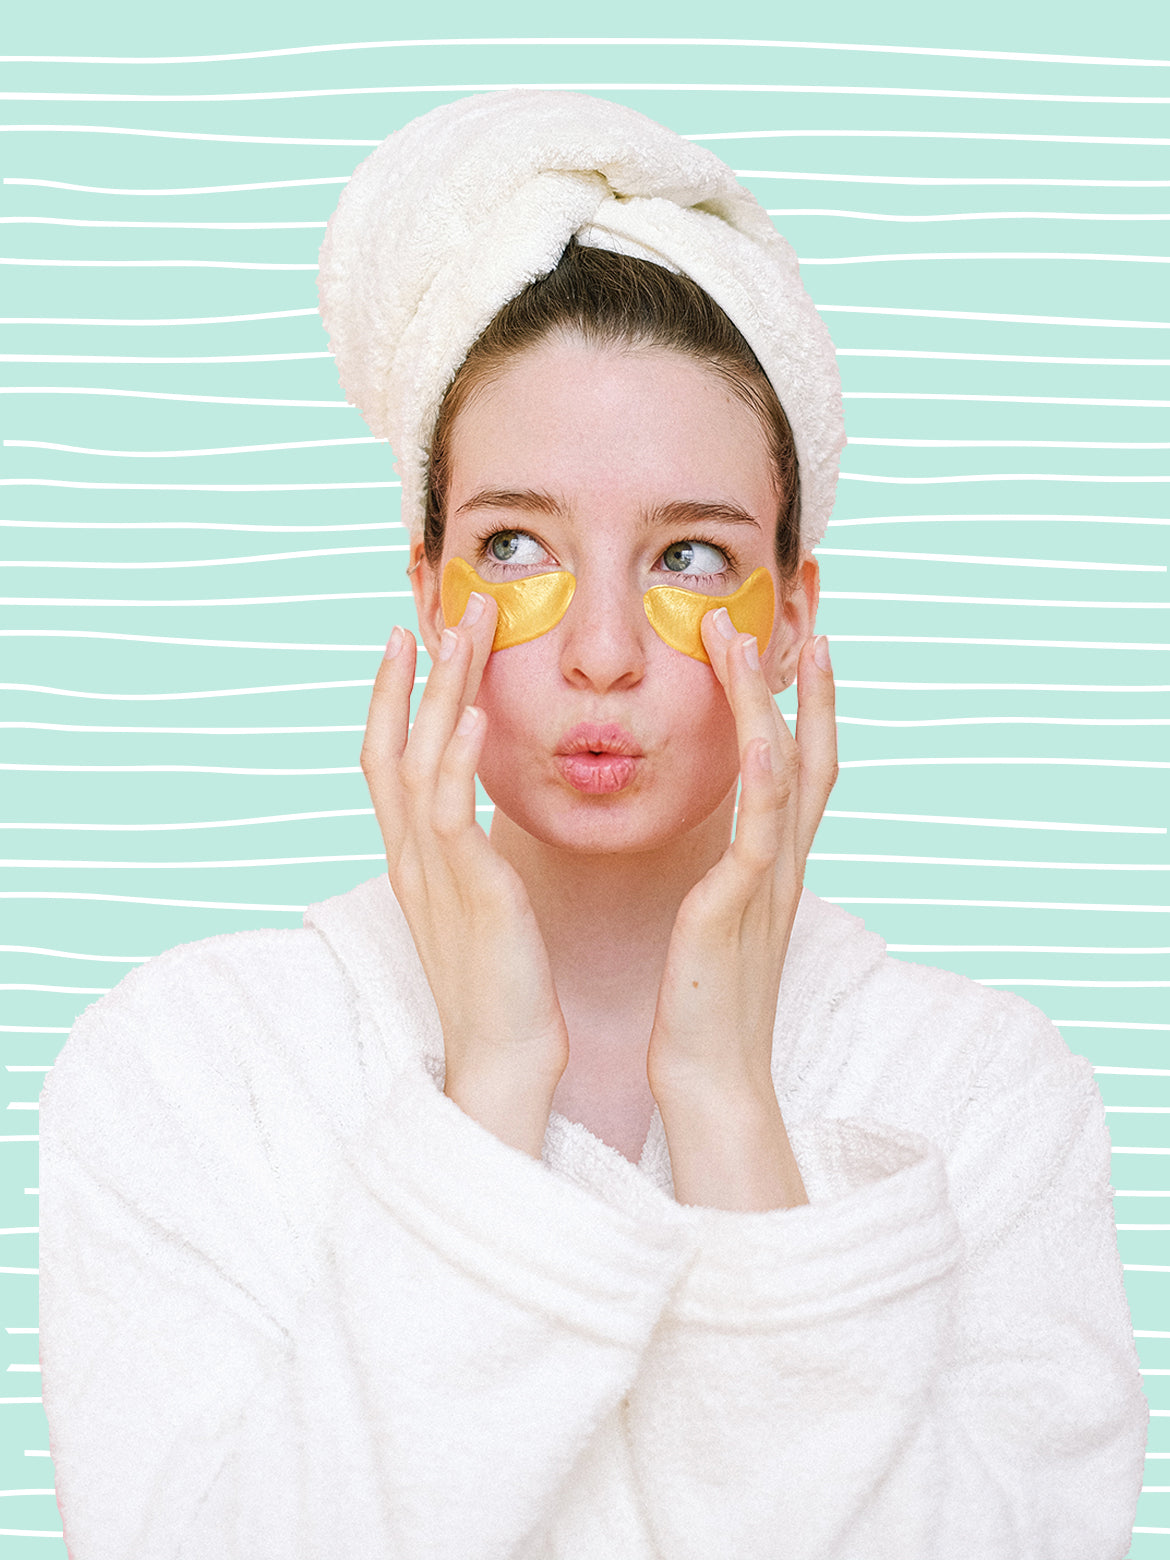 10 Skin care mistakes that could be damaging your skin